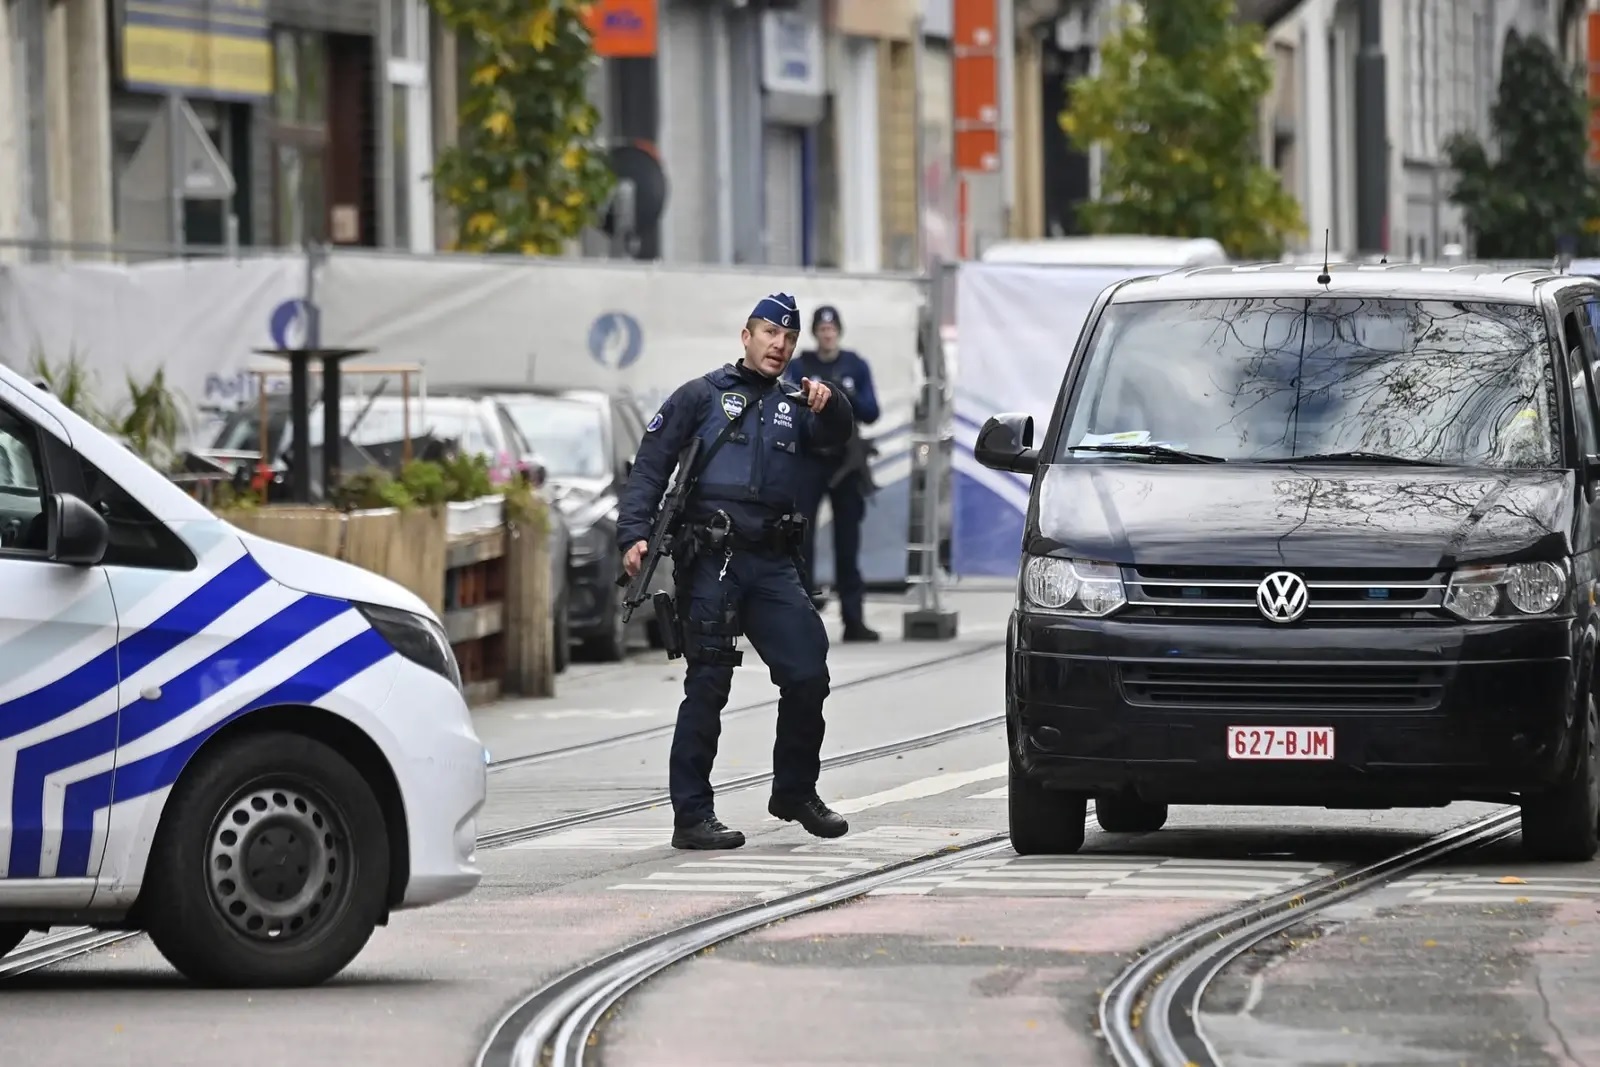 Belgium: Two dead, 2 seriously wounded in Brussels shooting